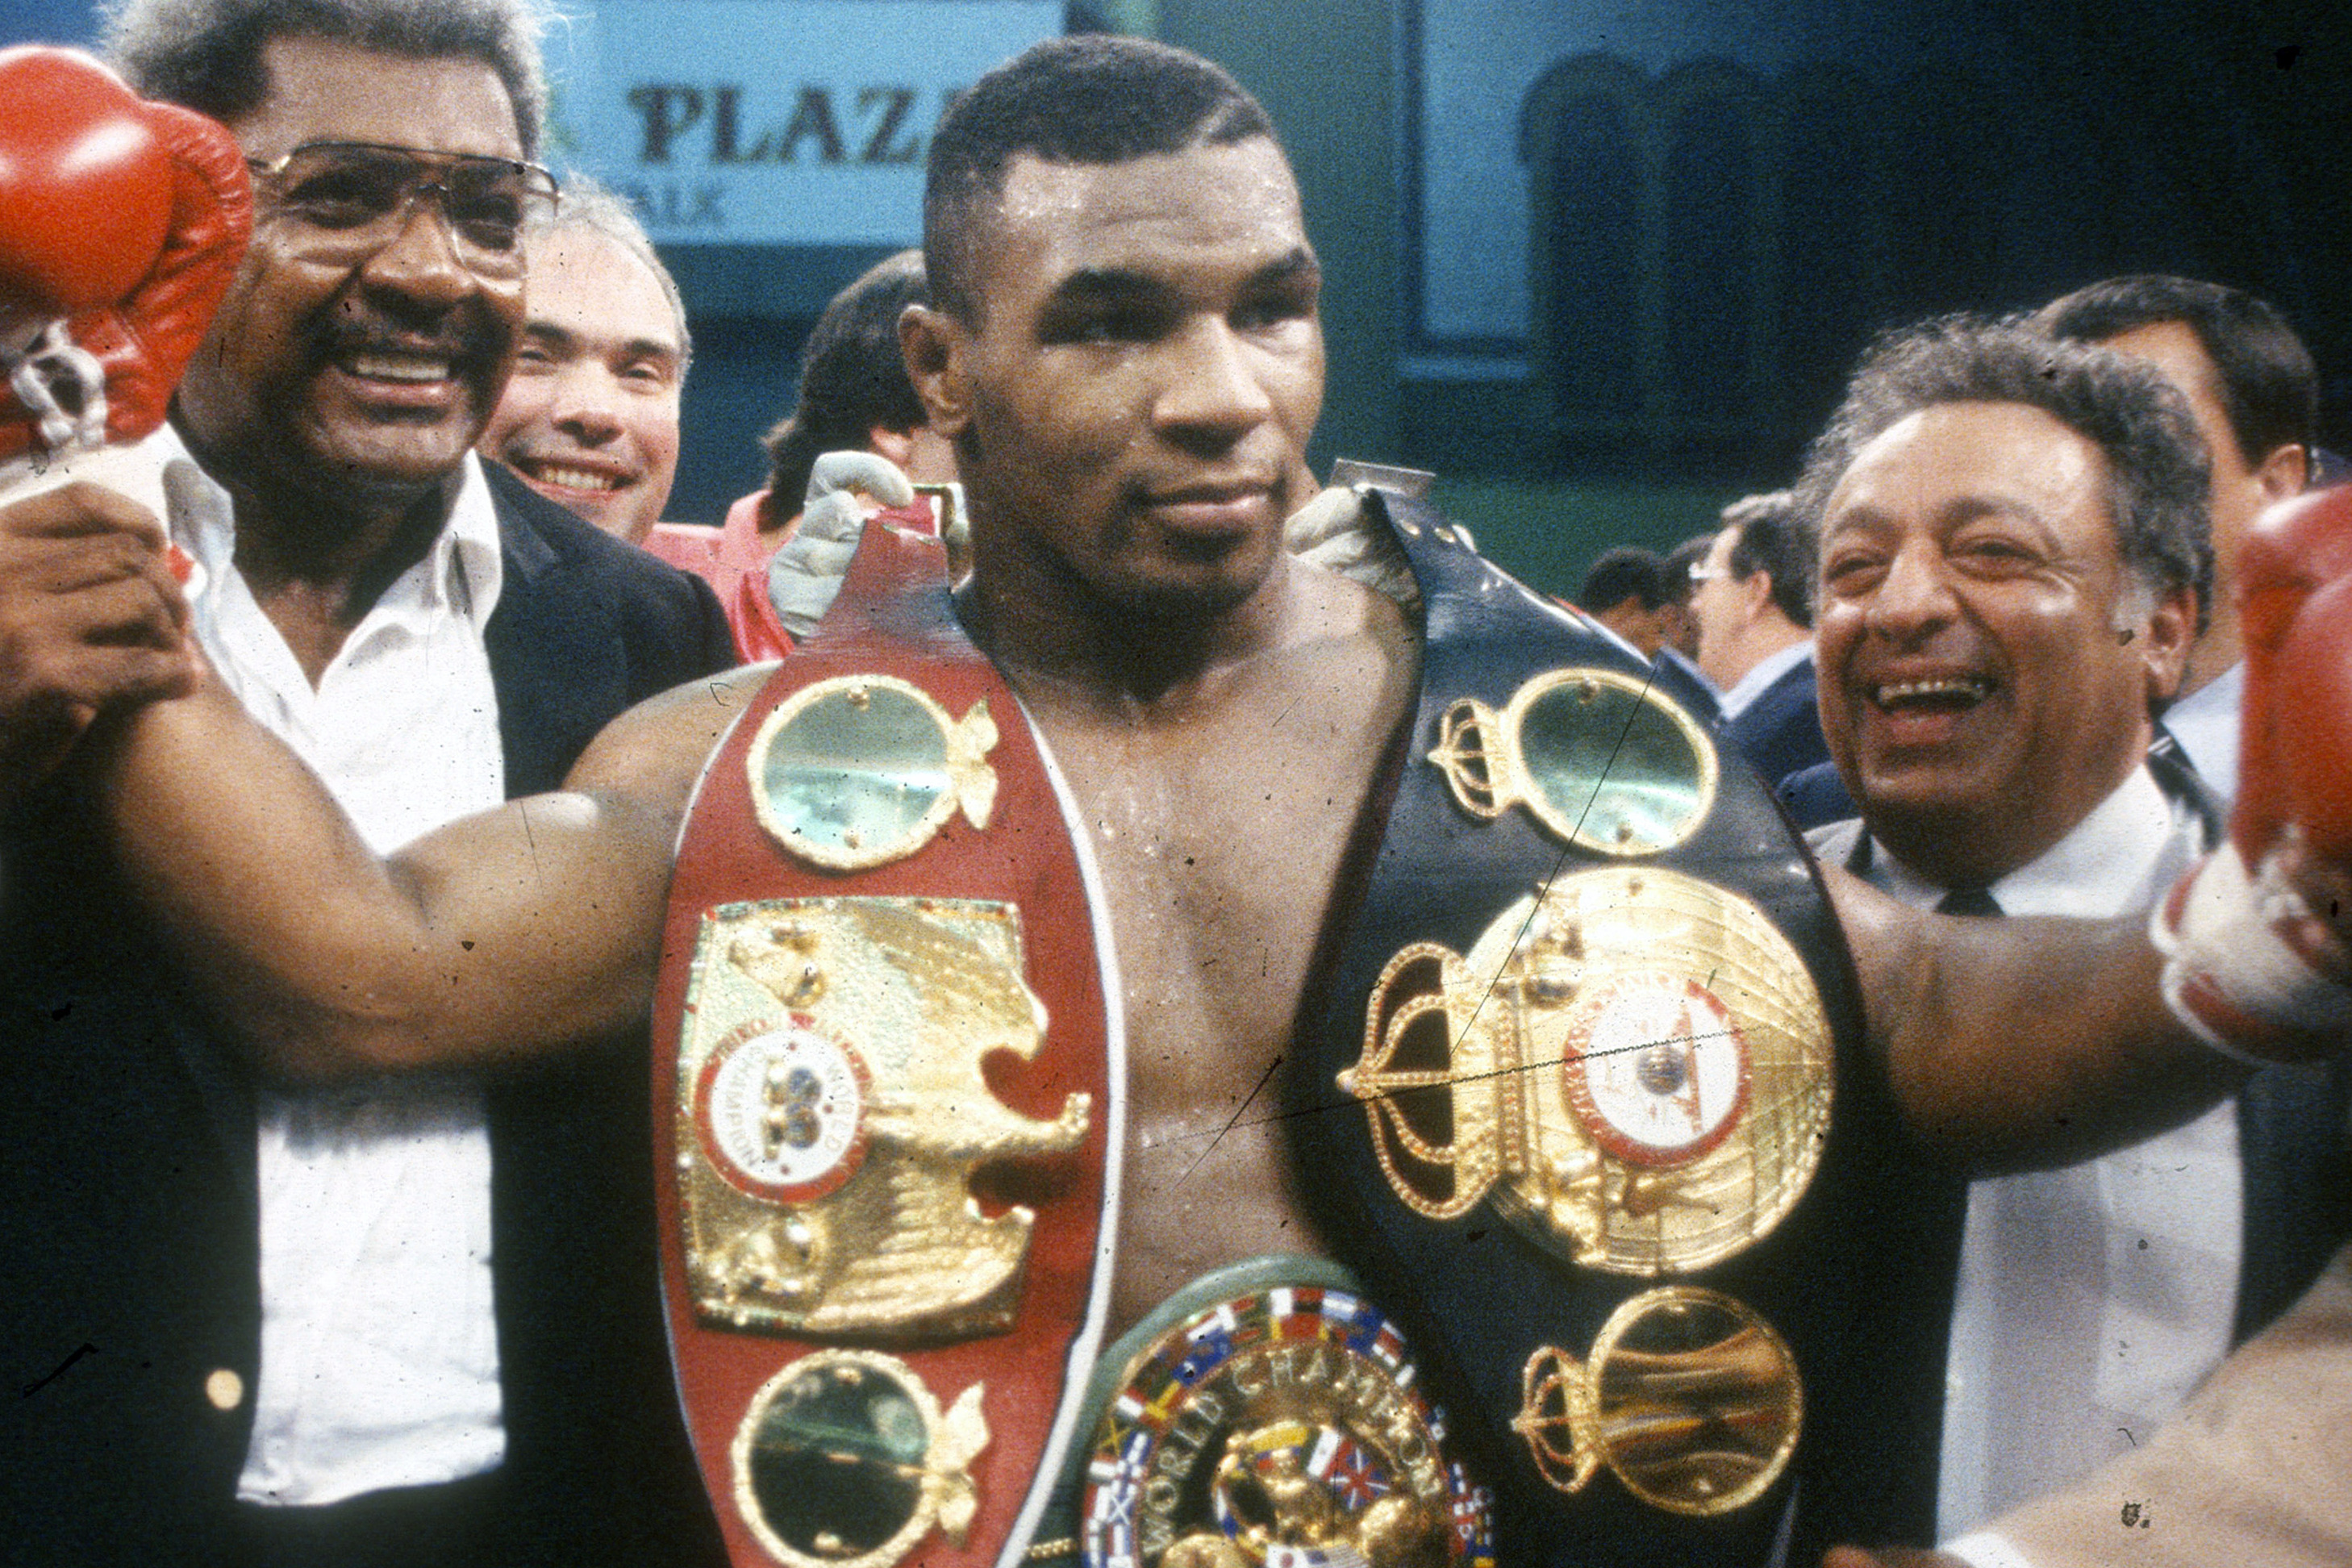 Mike Tyson's most infamous moment comes alive in new book, 'The